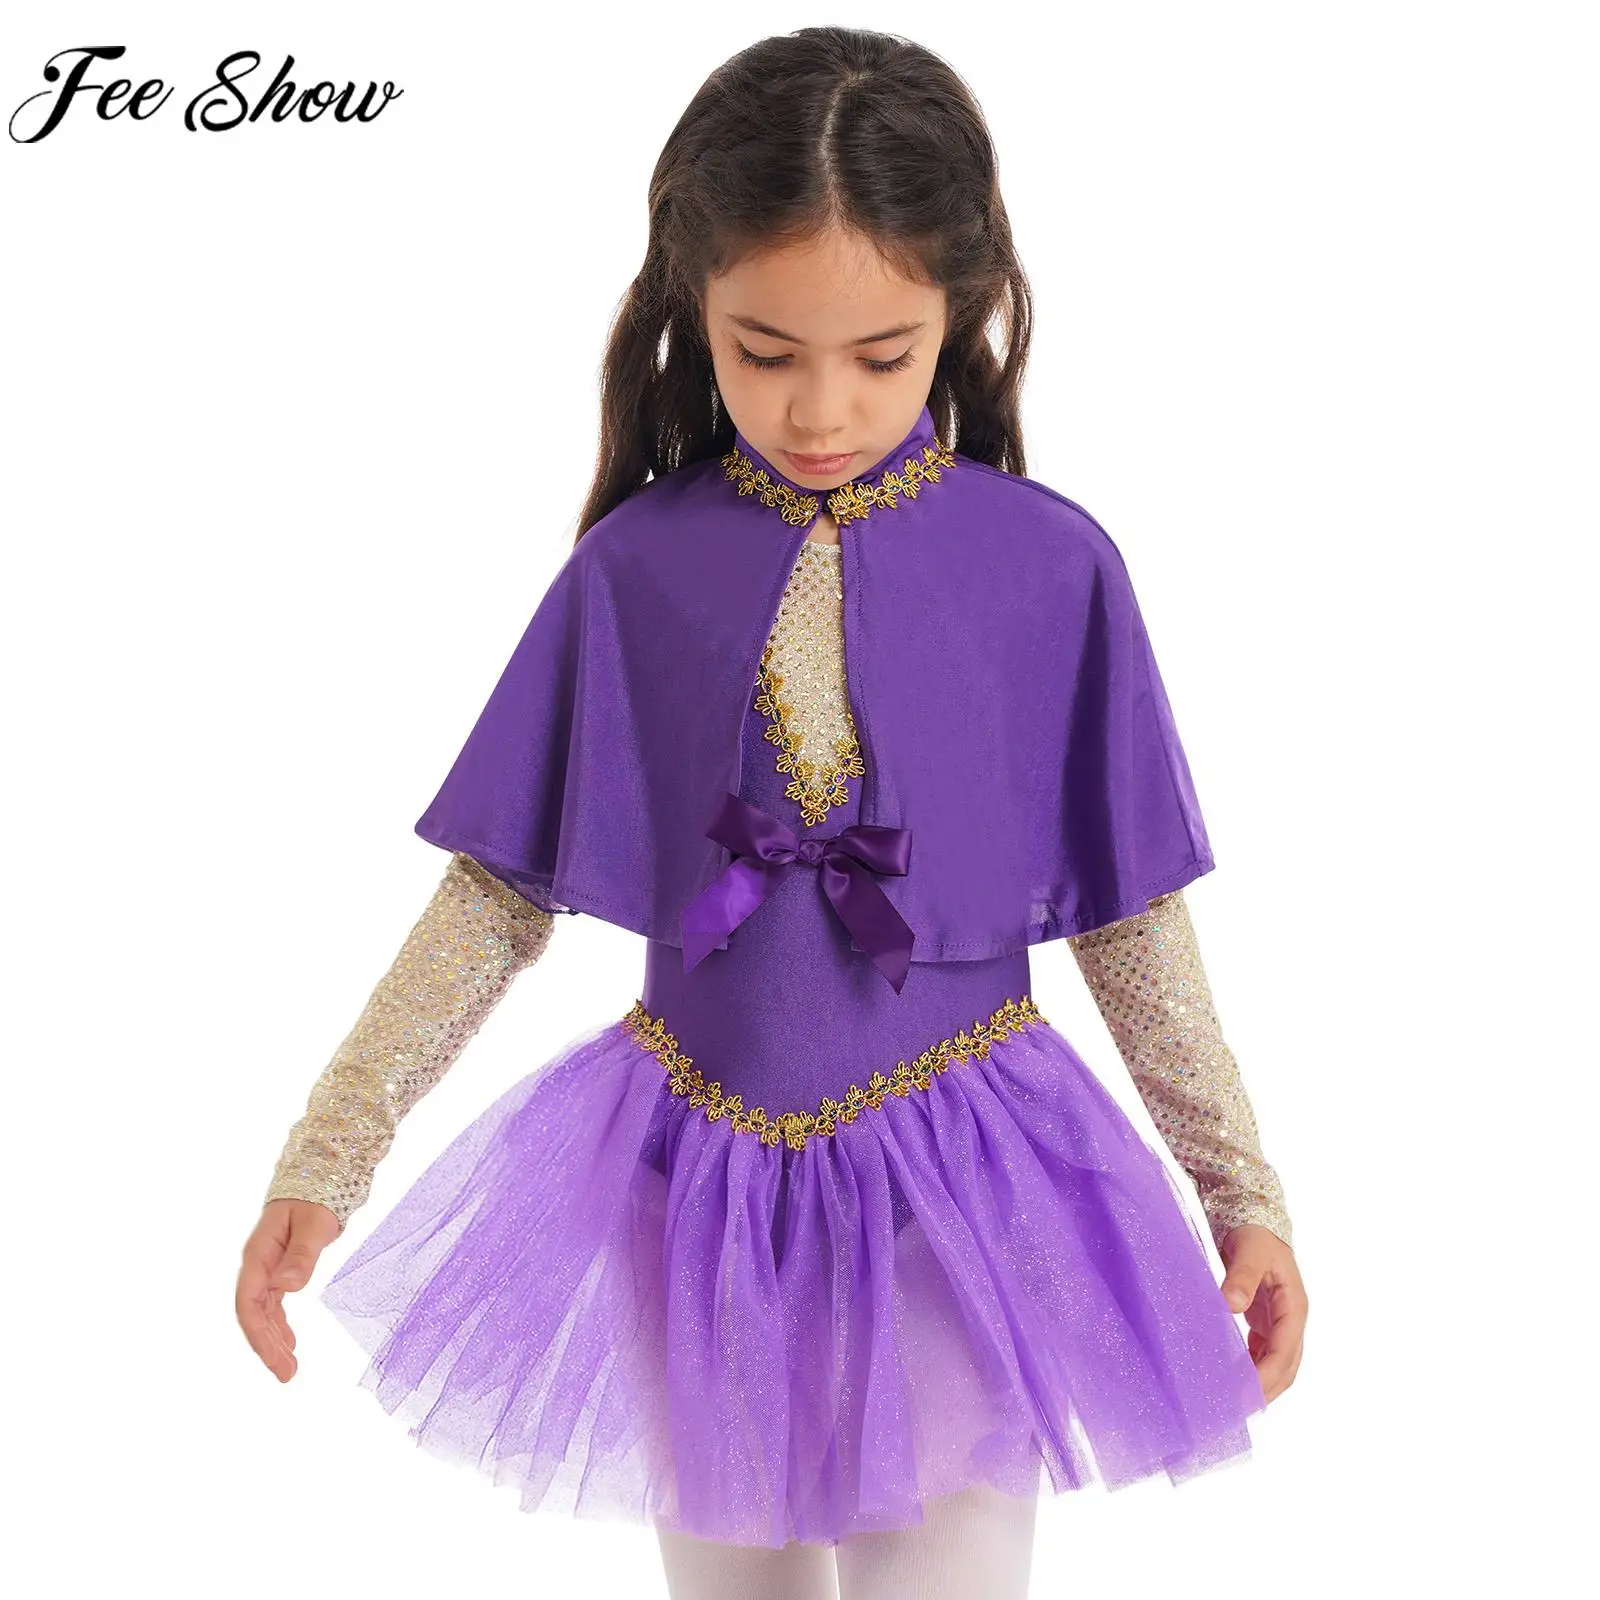 

Kids Halloween Cosplay Dress Showman Costume Girls Sequin Mesh Leotard Tutu with Cape Arm Sleeves Theme Party Carnival Outfits